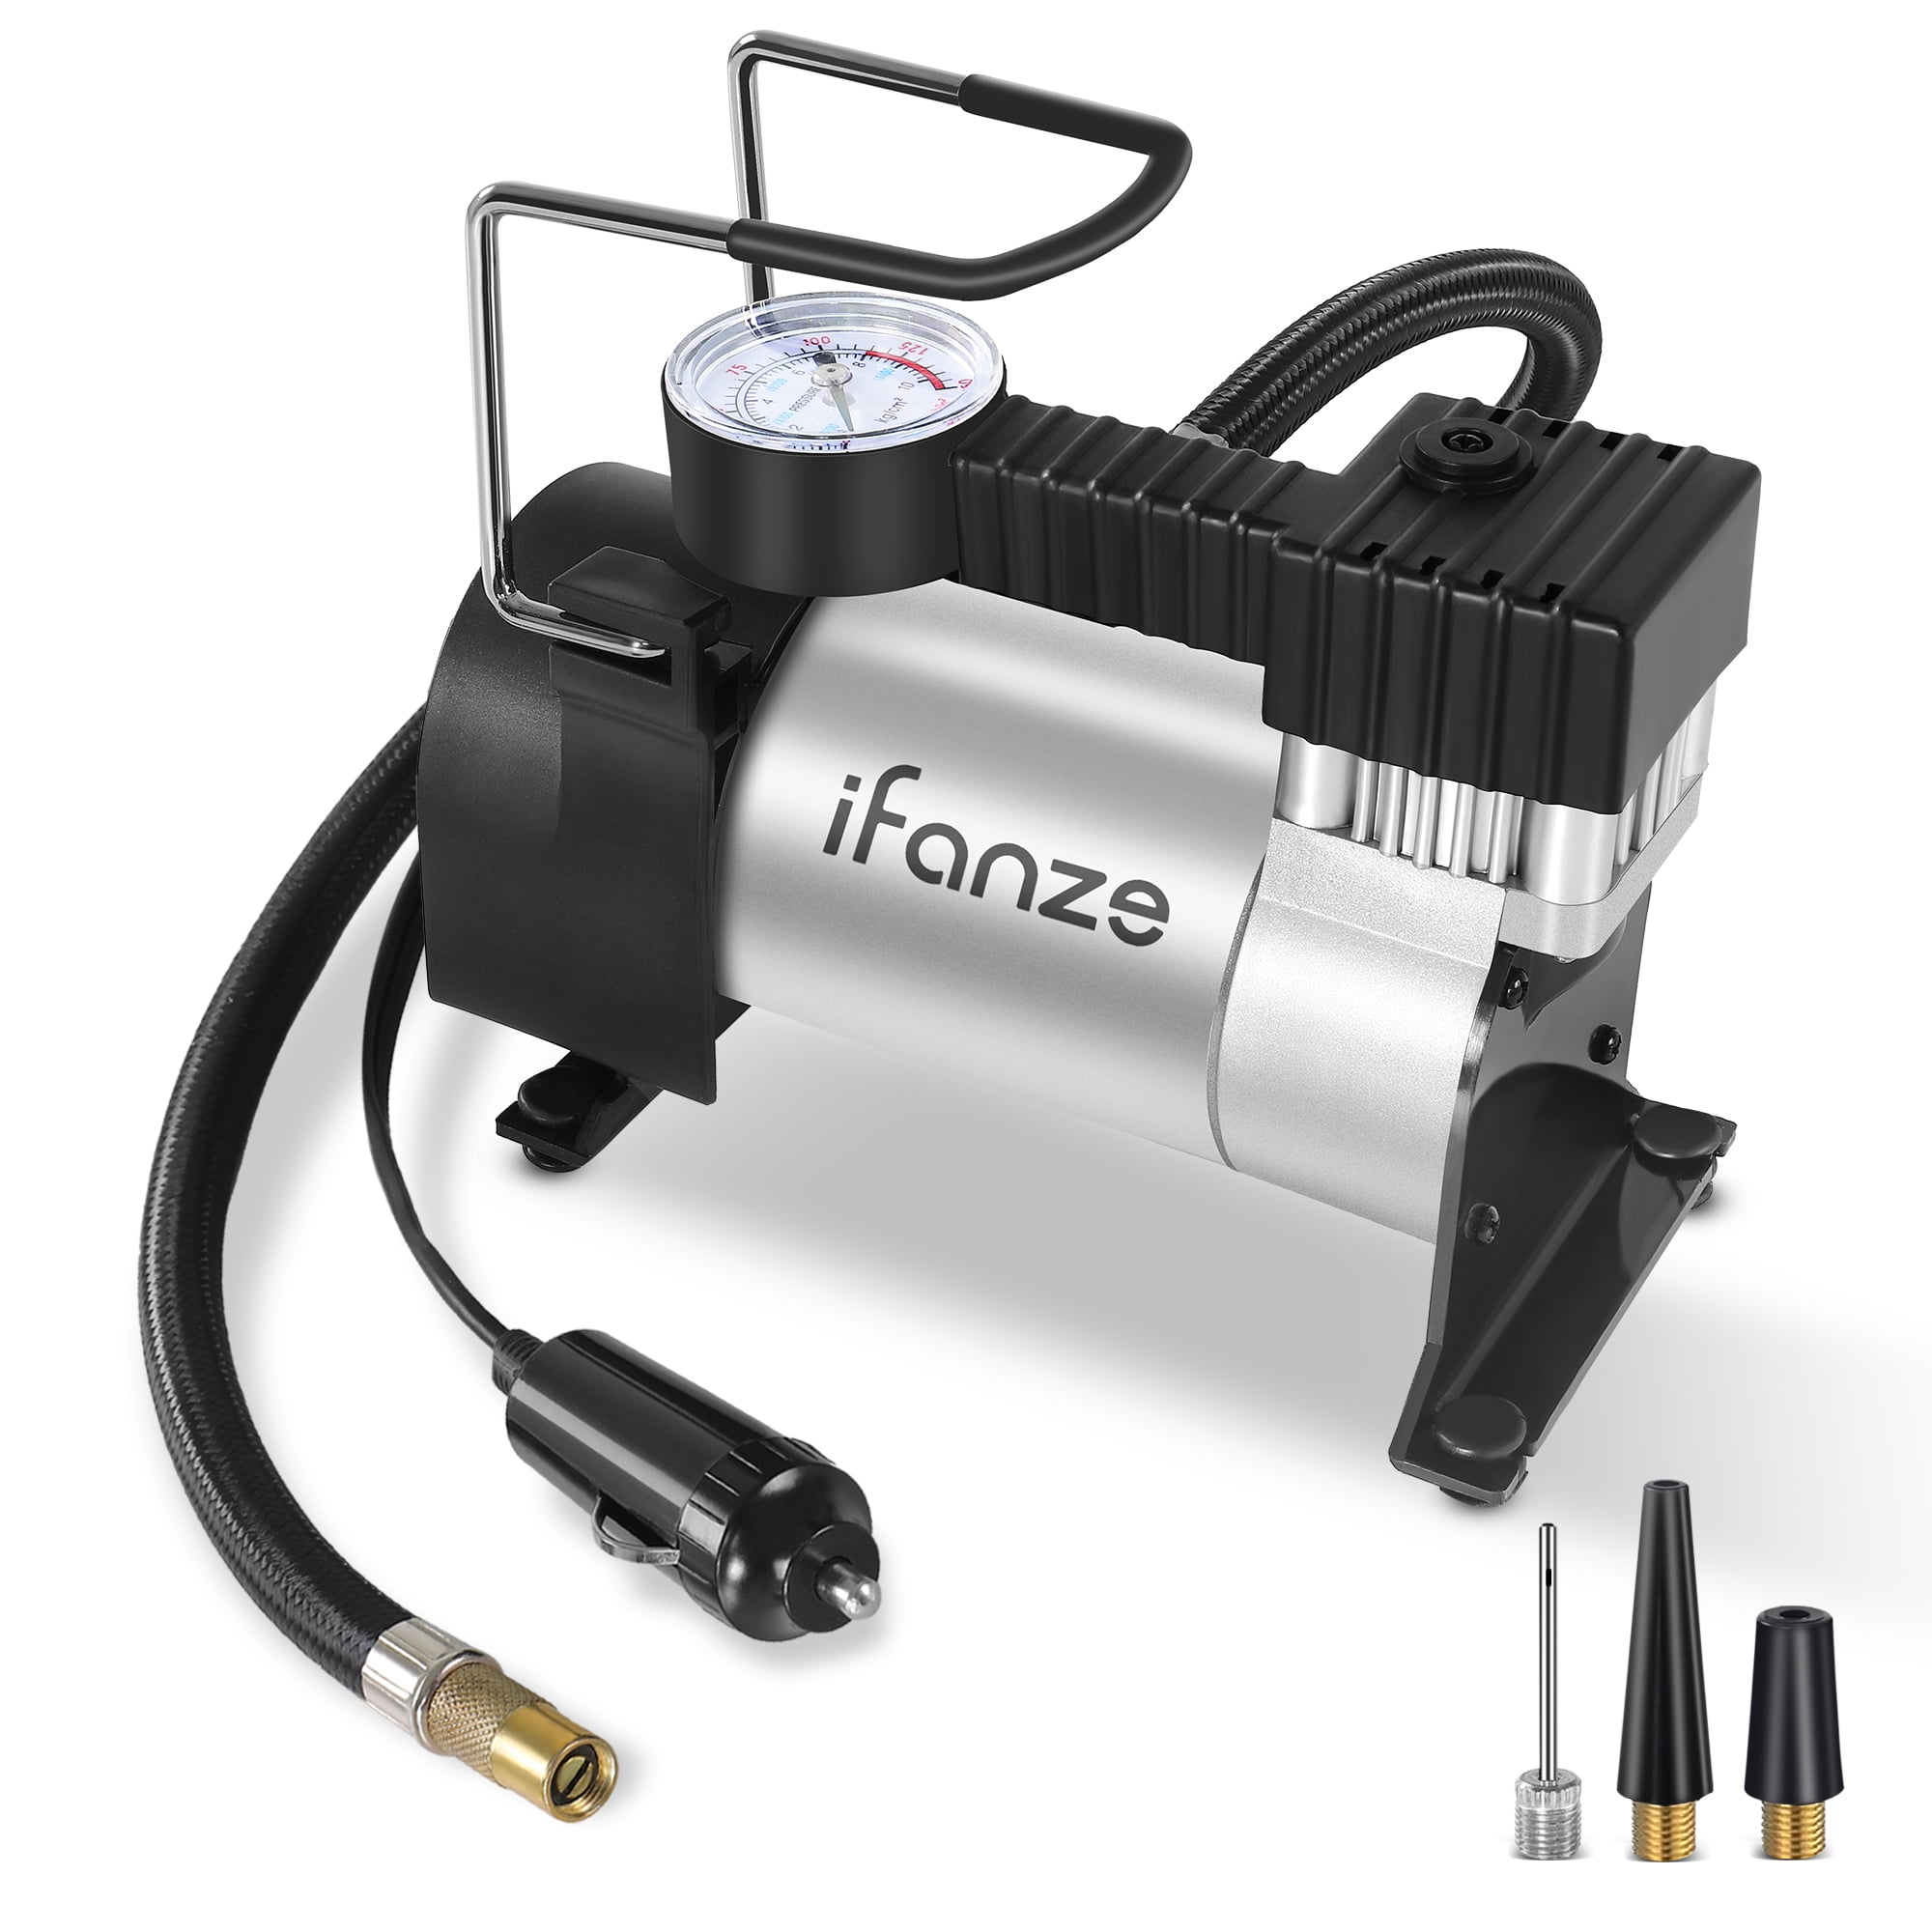 iFanze Tire Inflator Portable Air Compressor Pump DC 12V Tire Inflator for  Car, Air Pumps with Mechanical Pressure Gauge for Car, Bicycle, Motorcycle